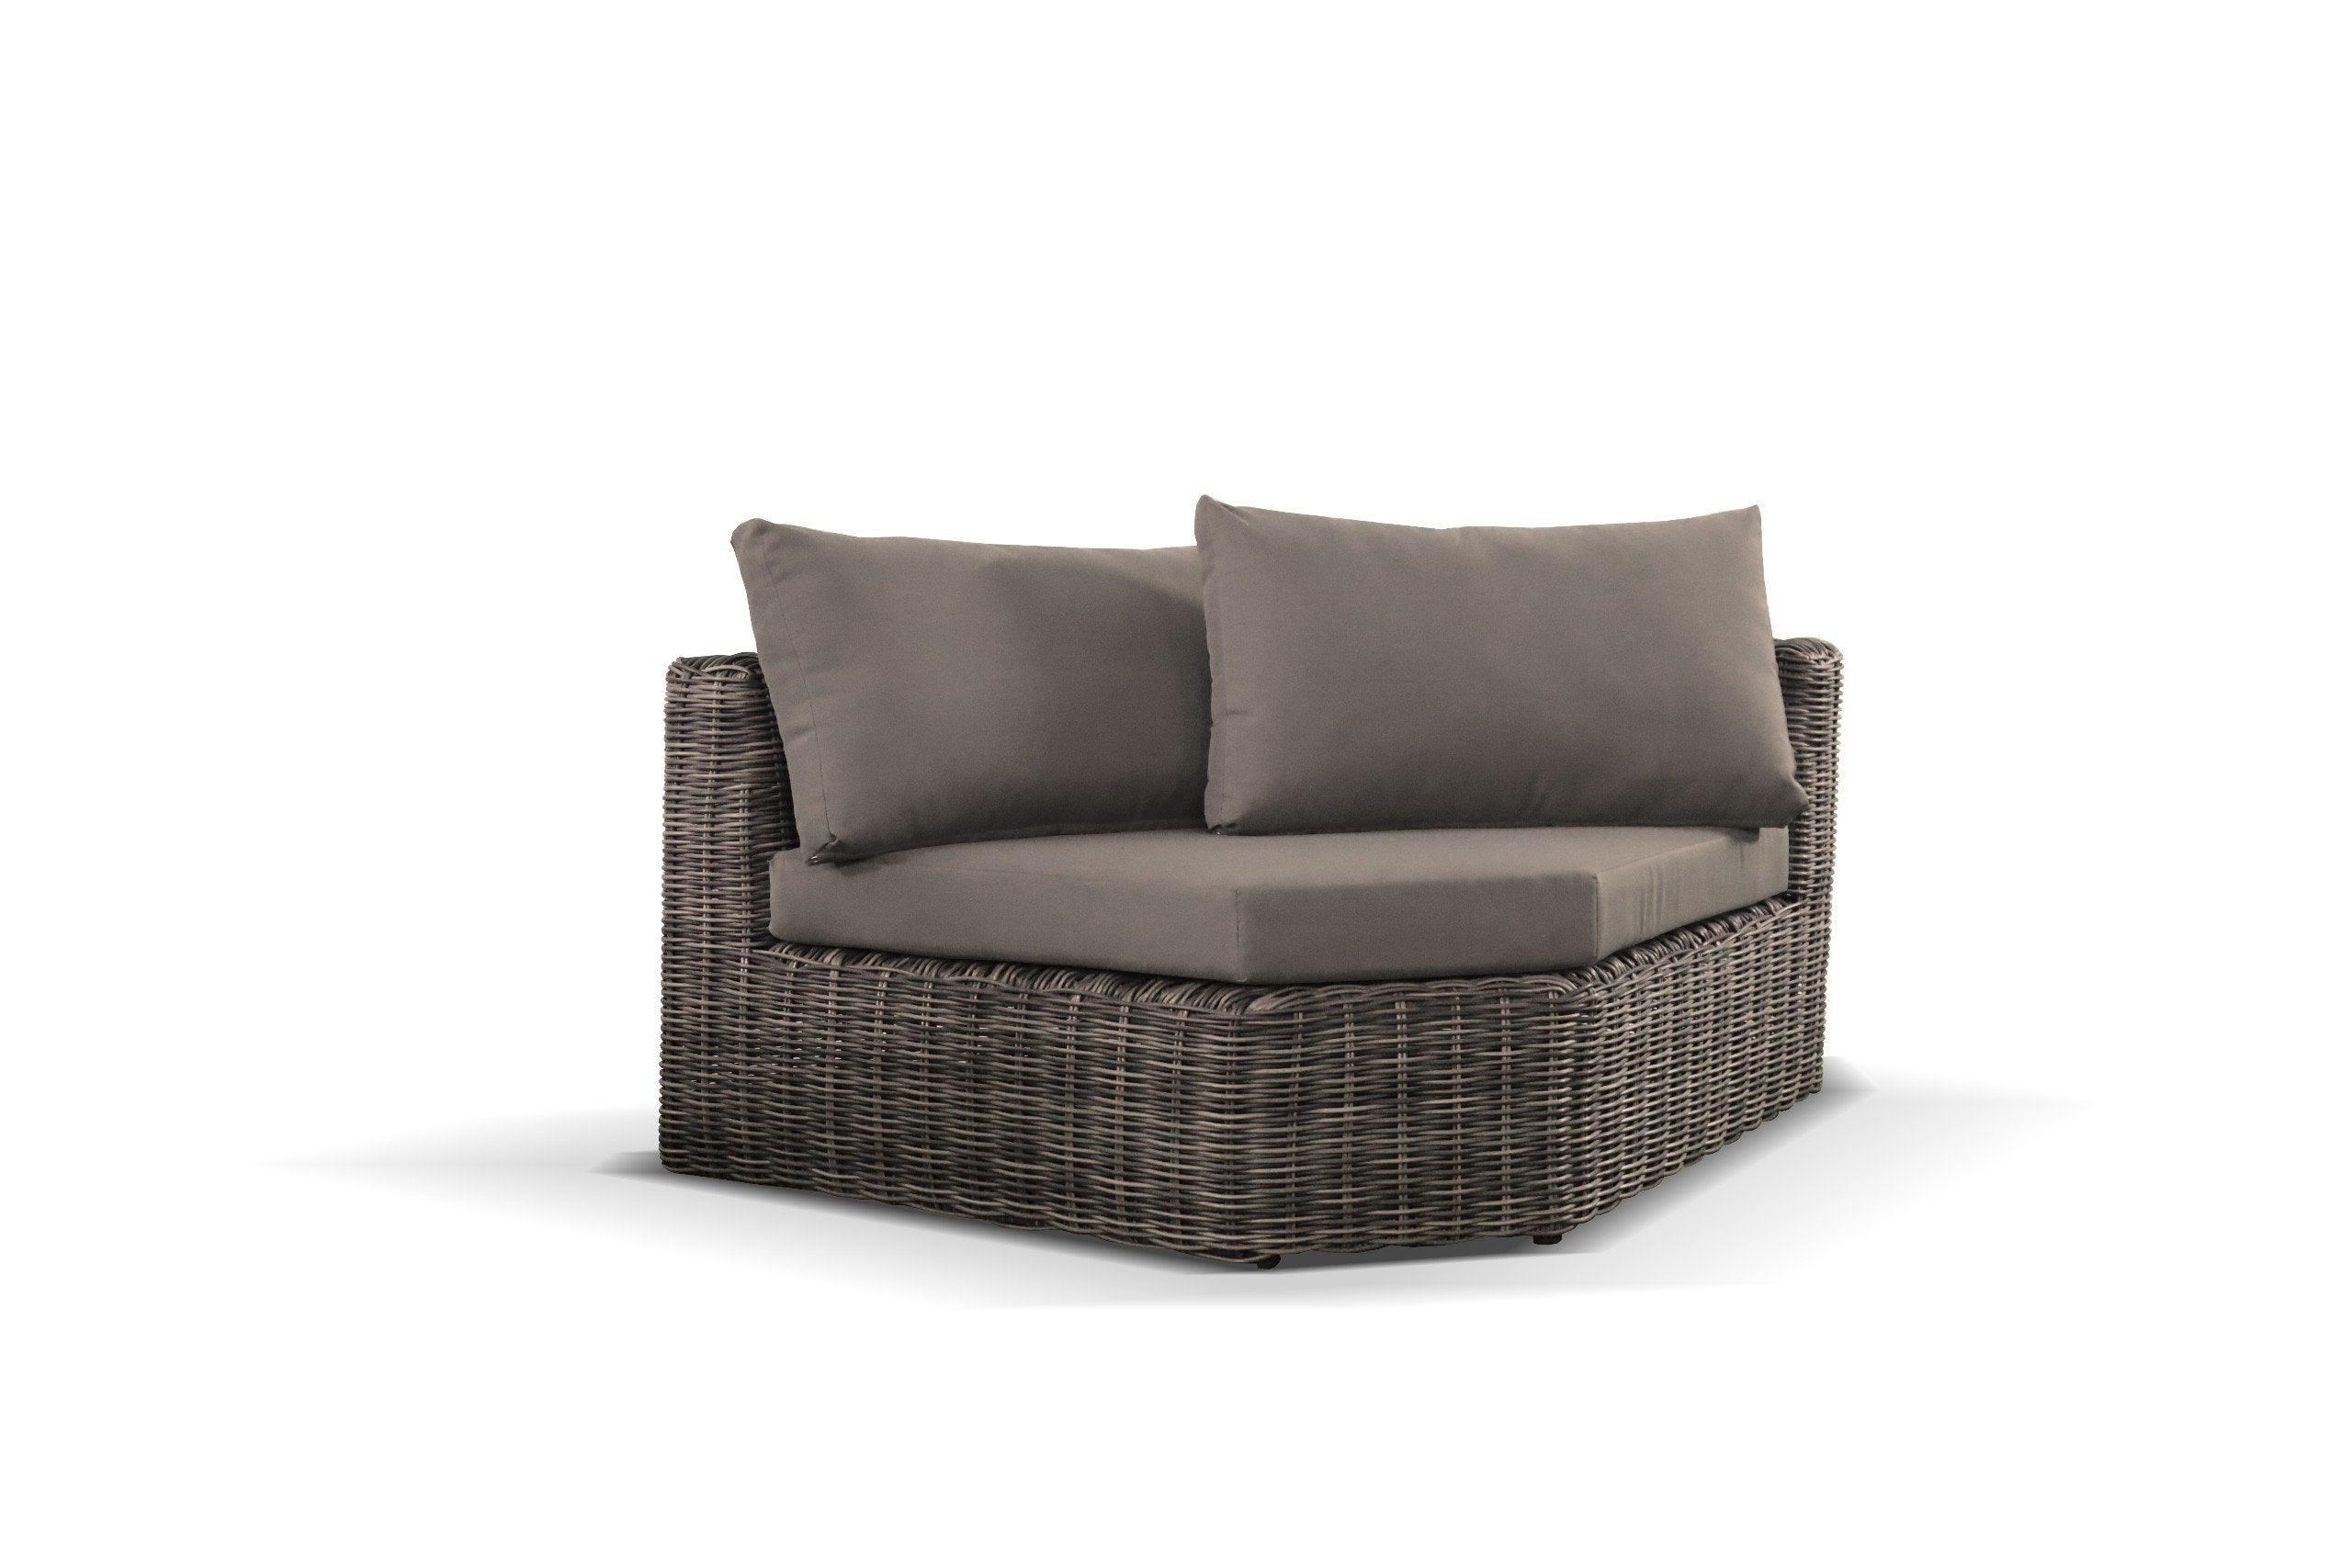 8 Piece Outdoor Sectional Set